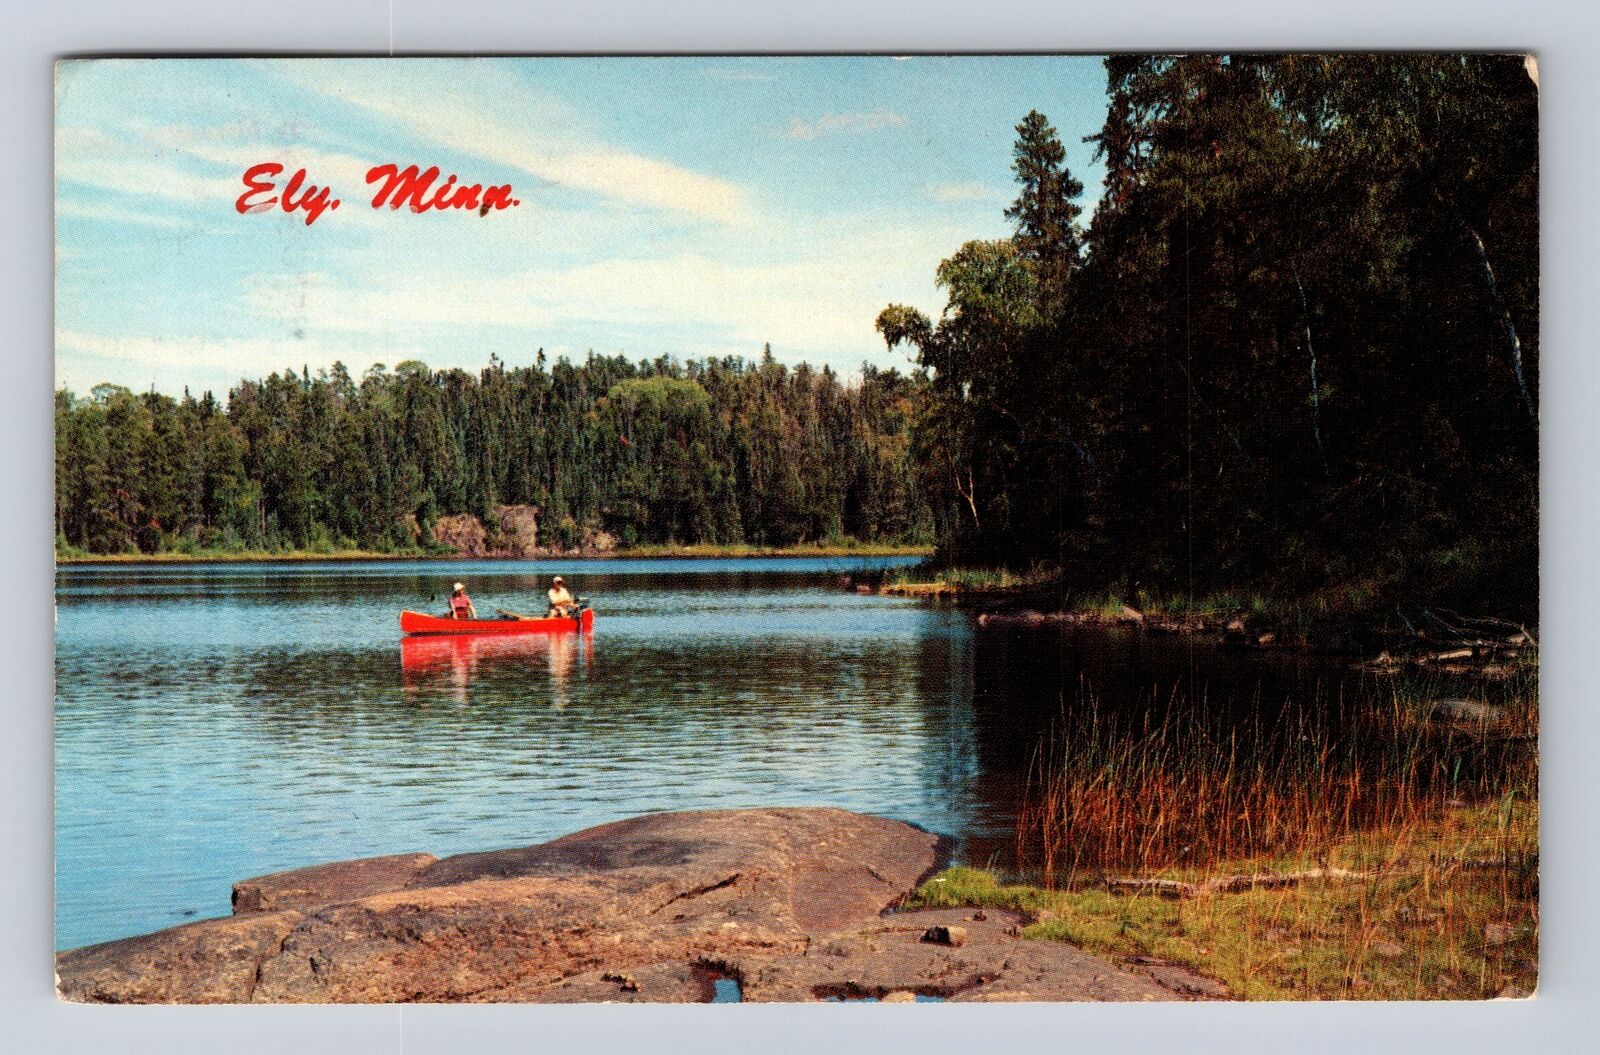 Ely MN-Minnesota, Fishing from Red Canoe, Antique Vintage Souvenir Postcard